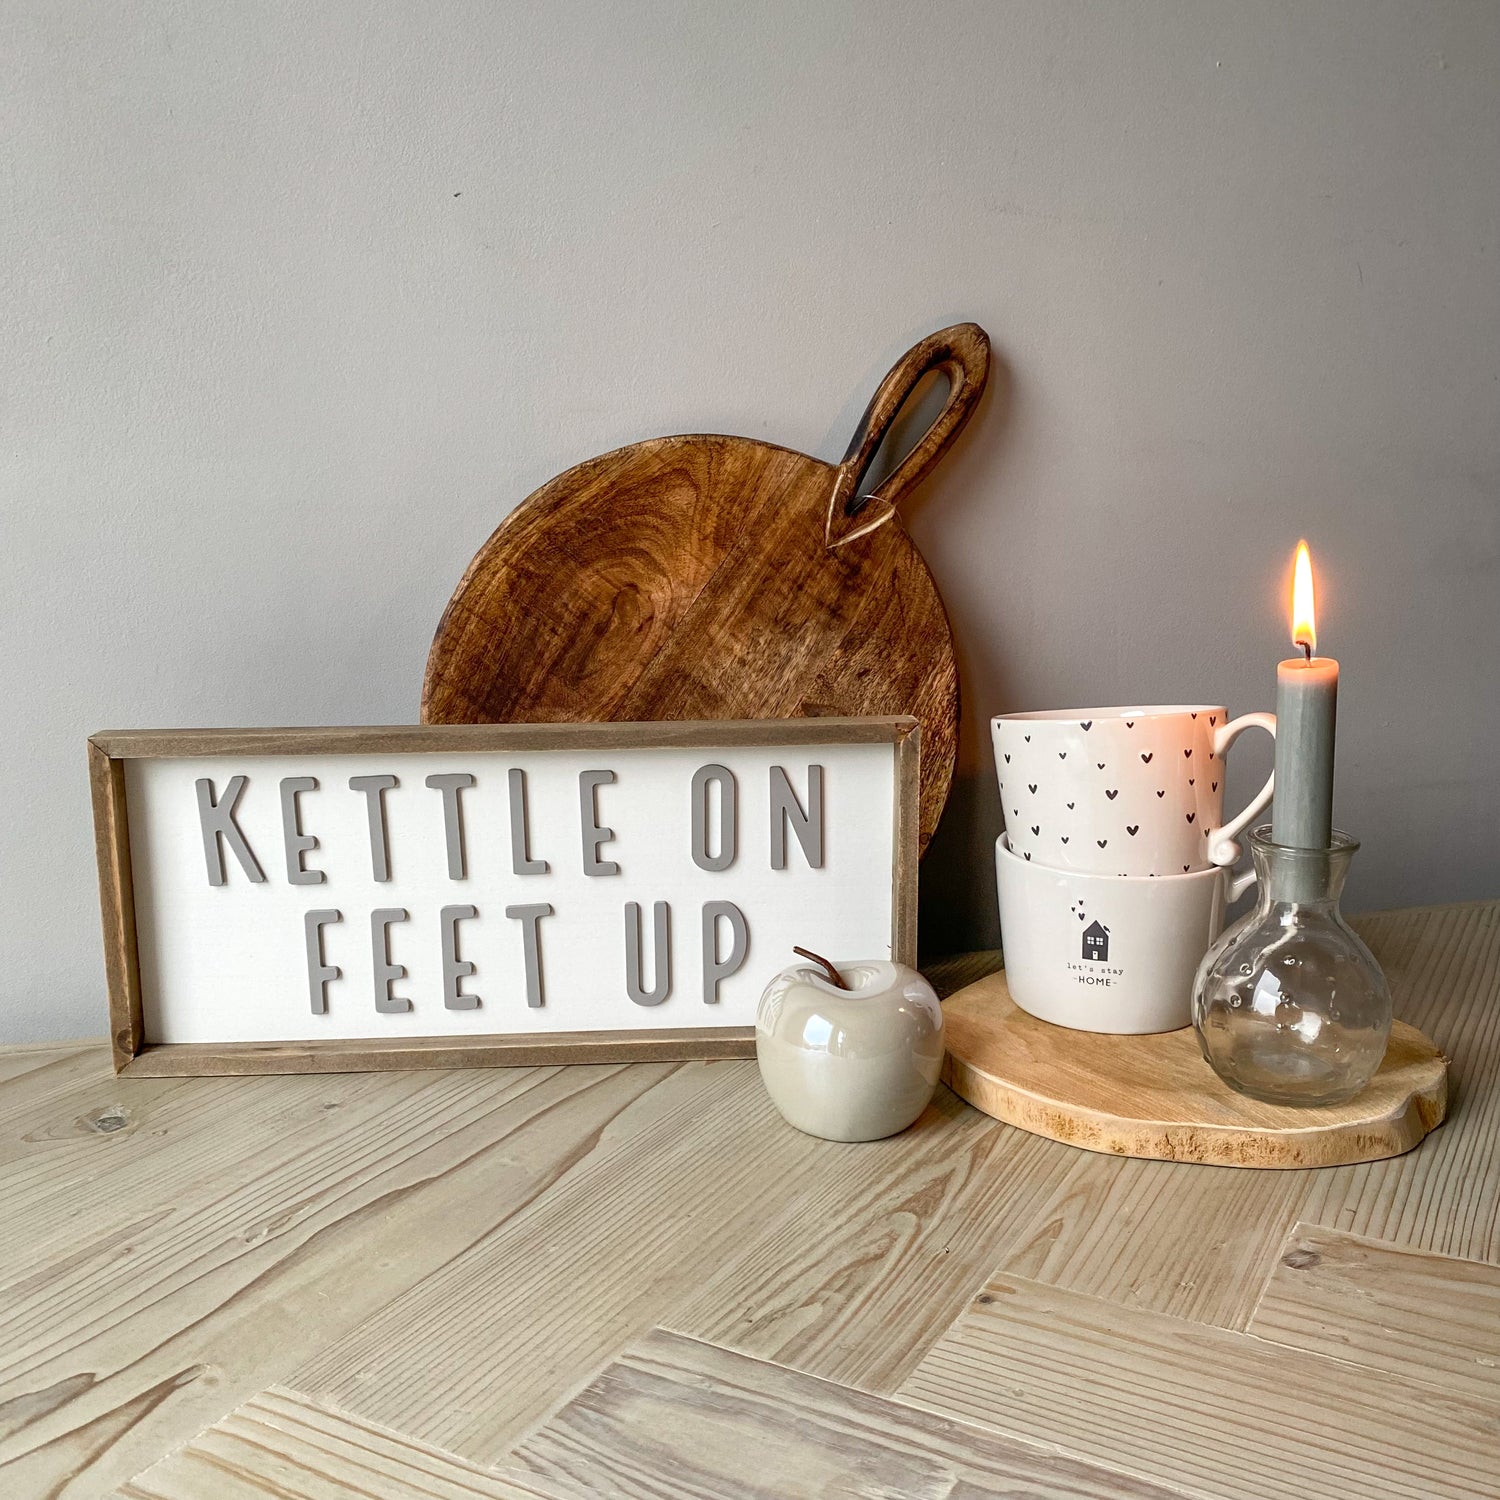 Kettle On Feet Up Sign